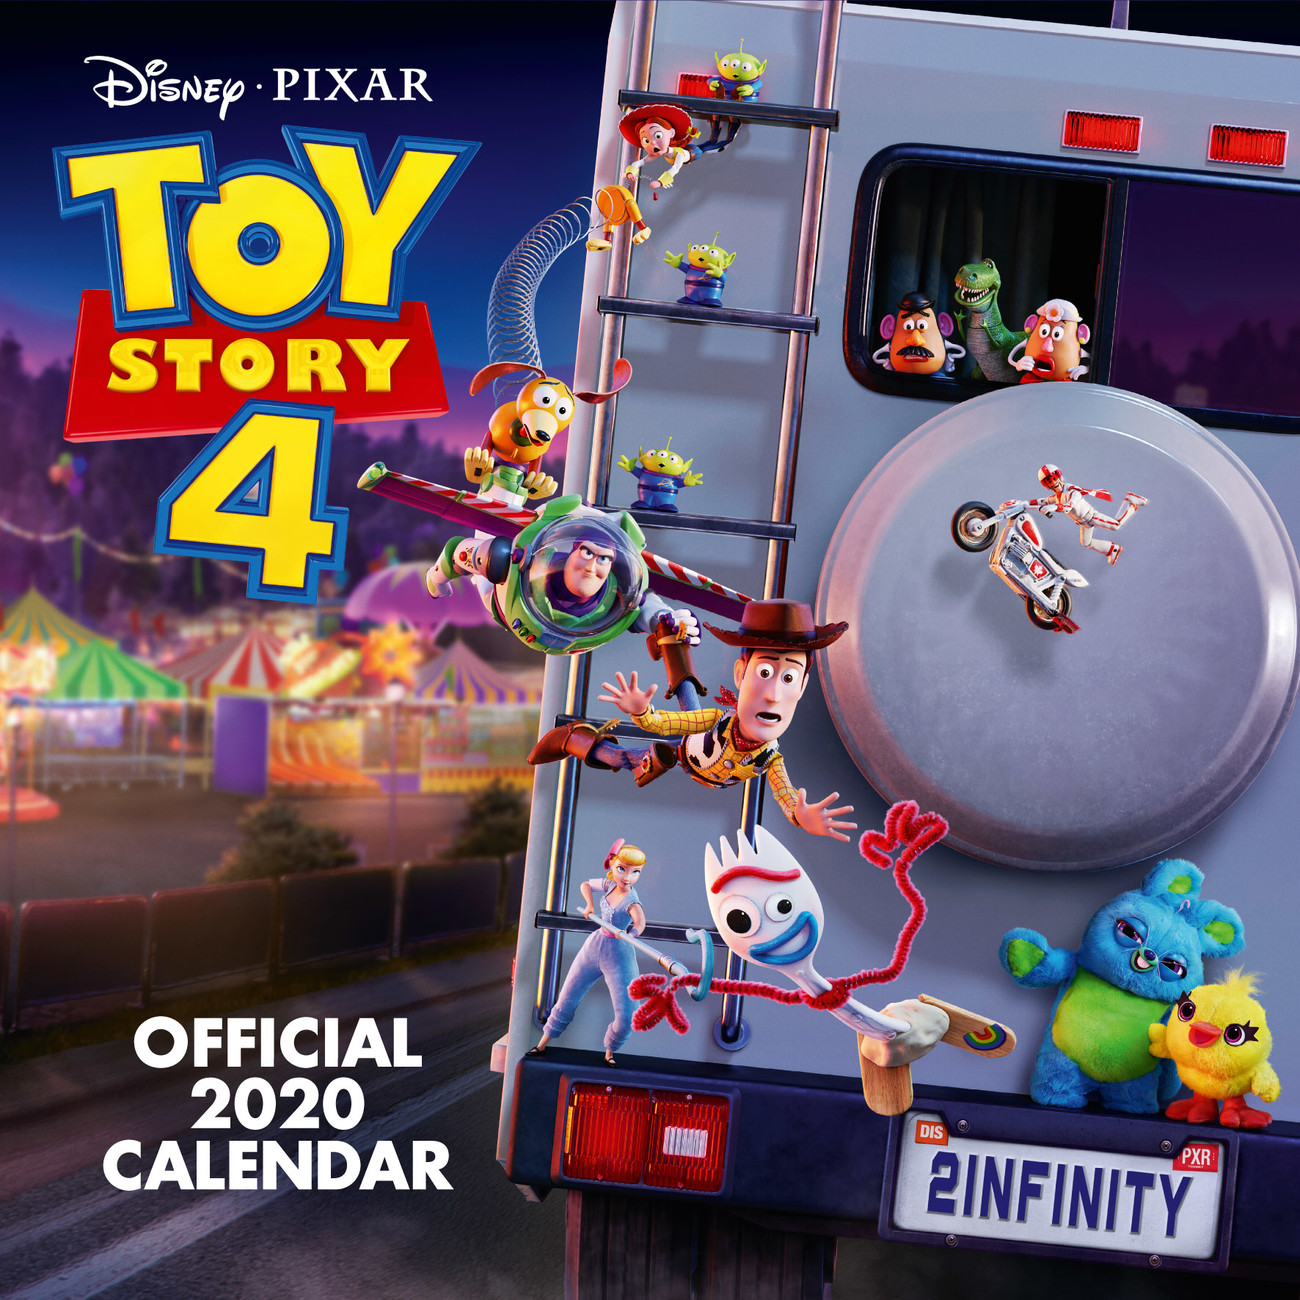 Toy Story 4 Wandkalender 2020 Kaufen bei Europosters